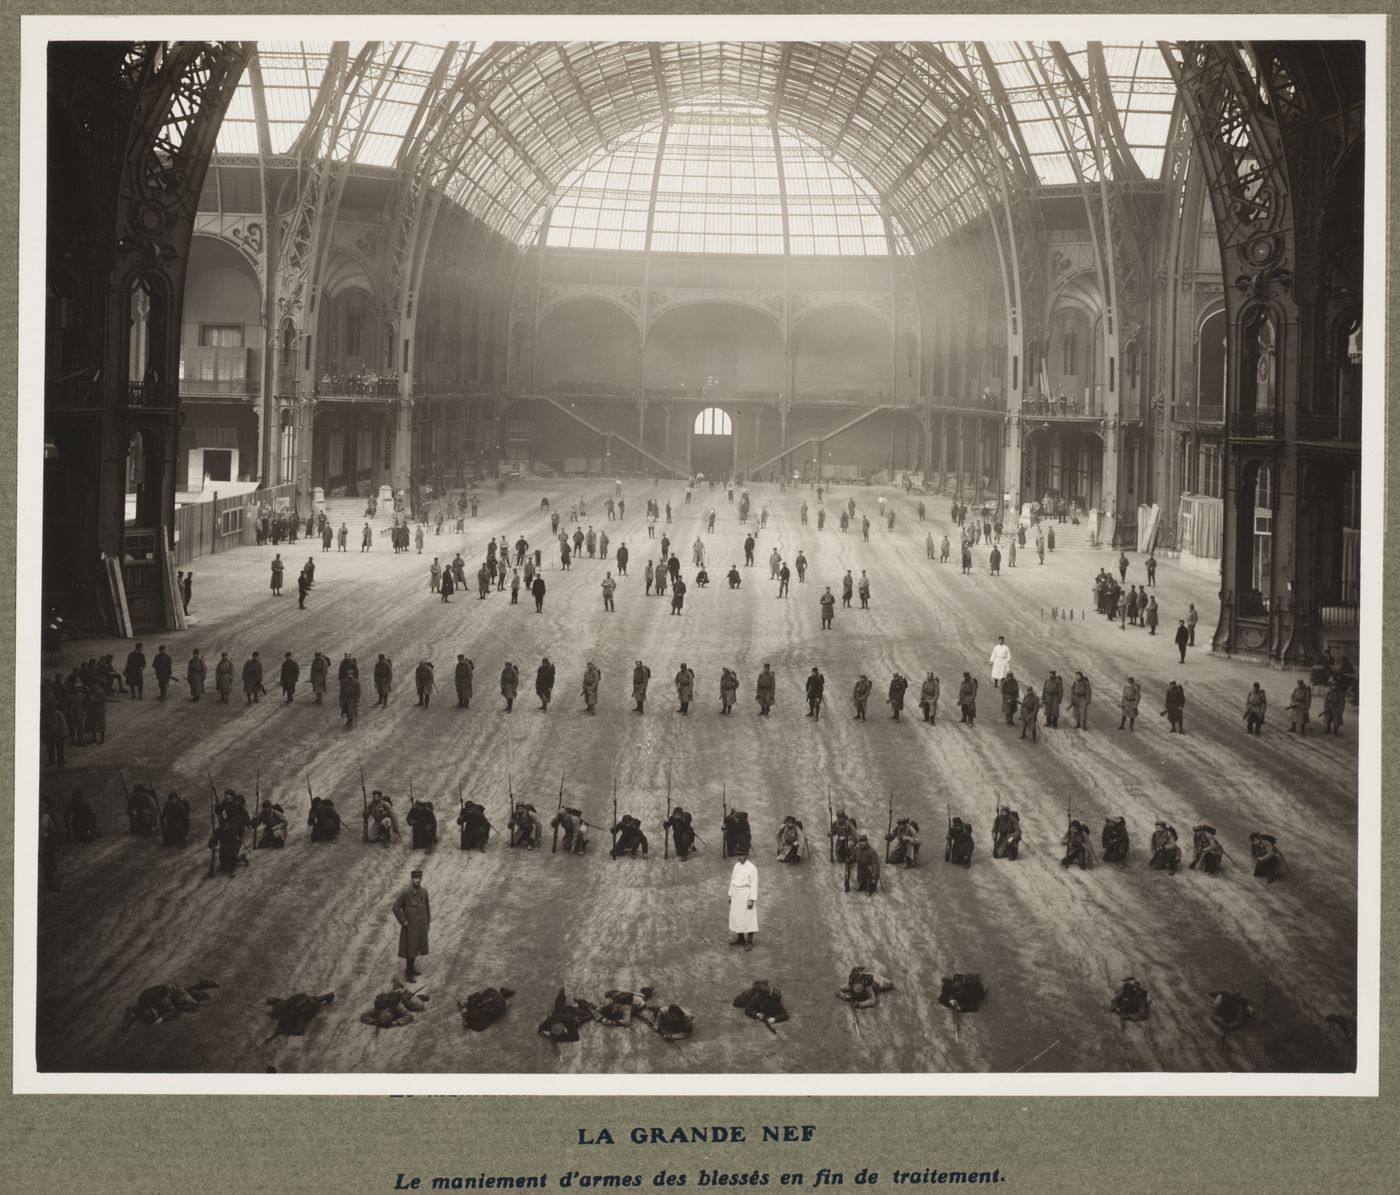 Interior view of soldiers, some armed, in the Grand Nave in the military hospital housed in the Grand Palais during World War I, Paris, France